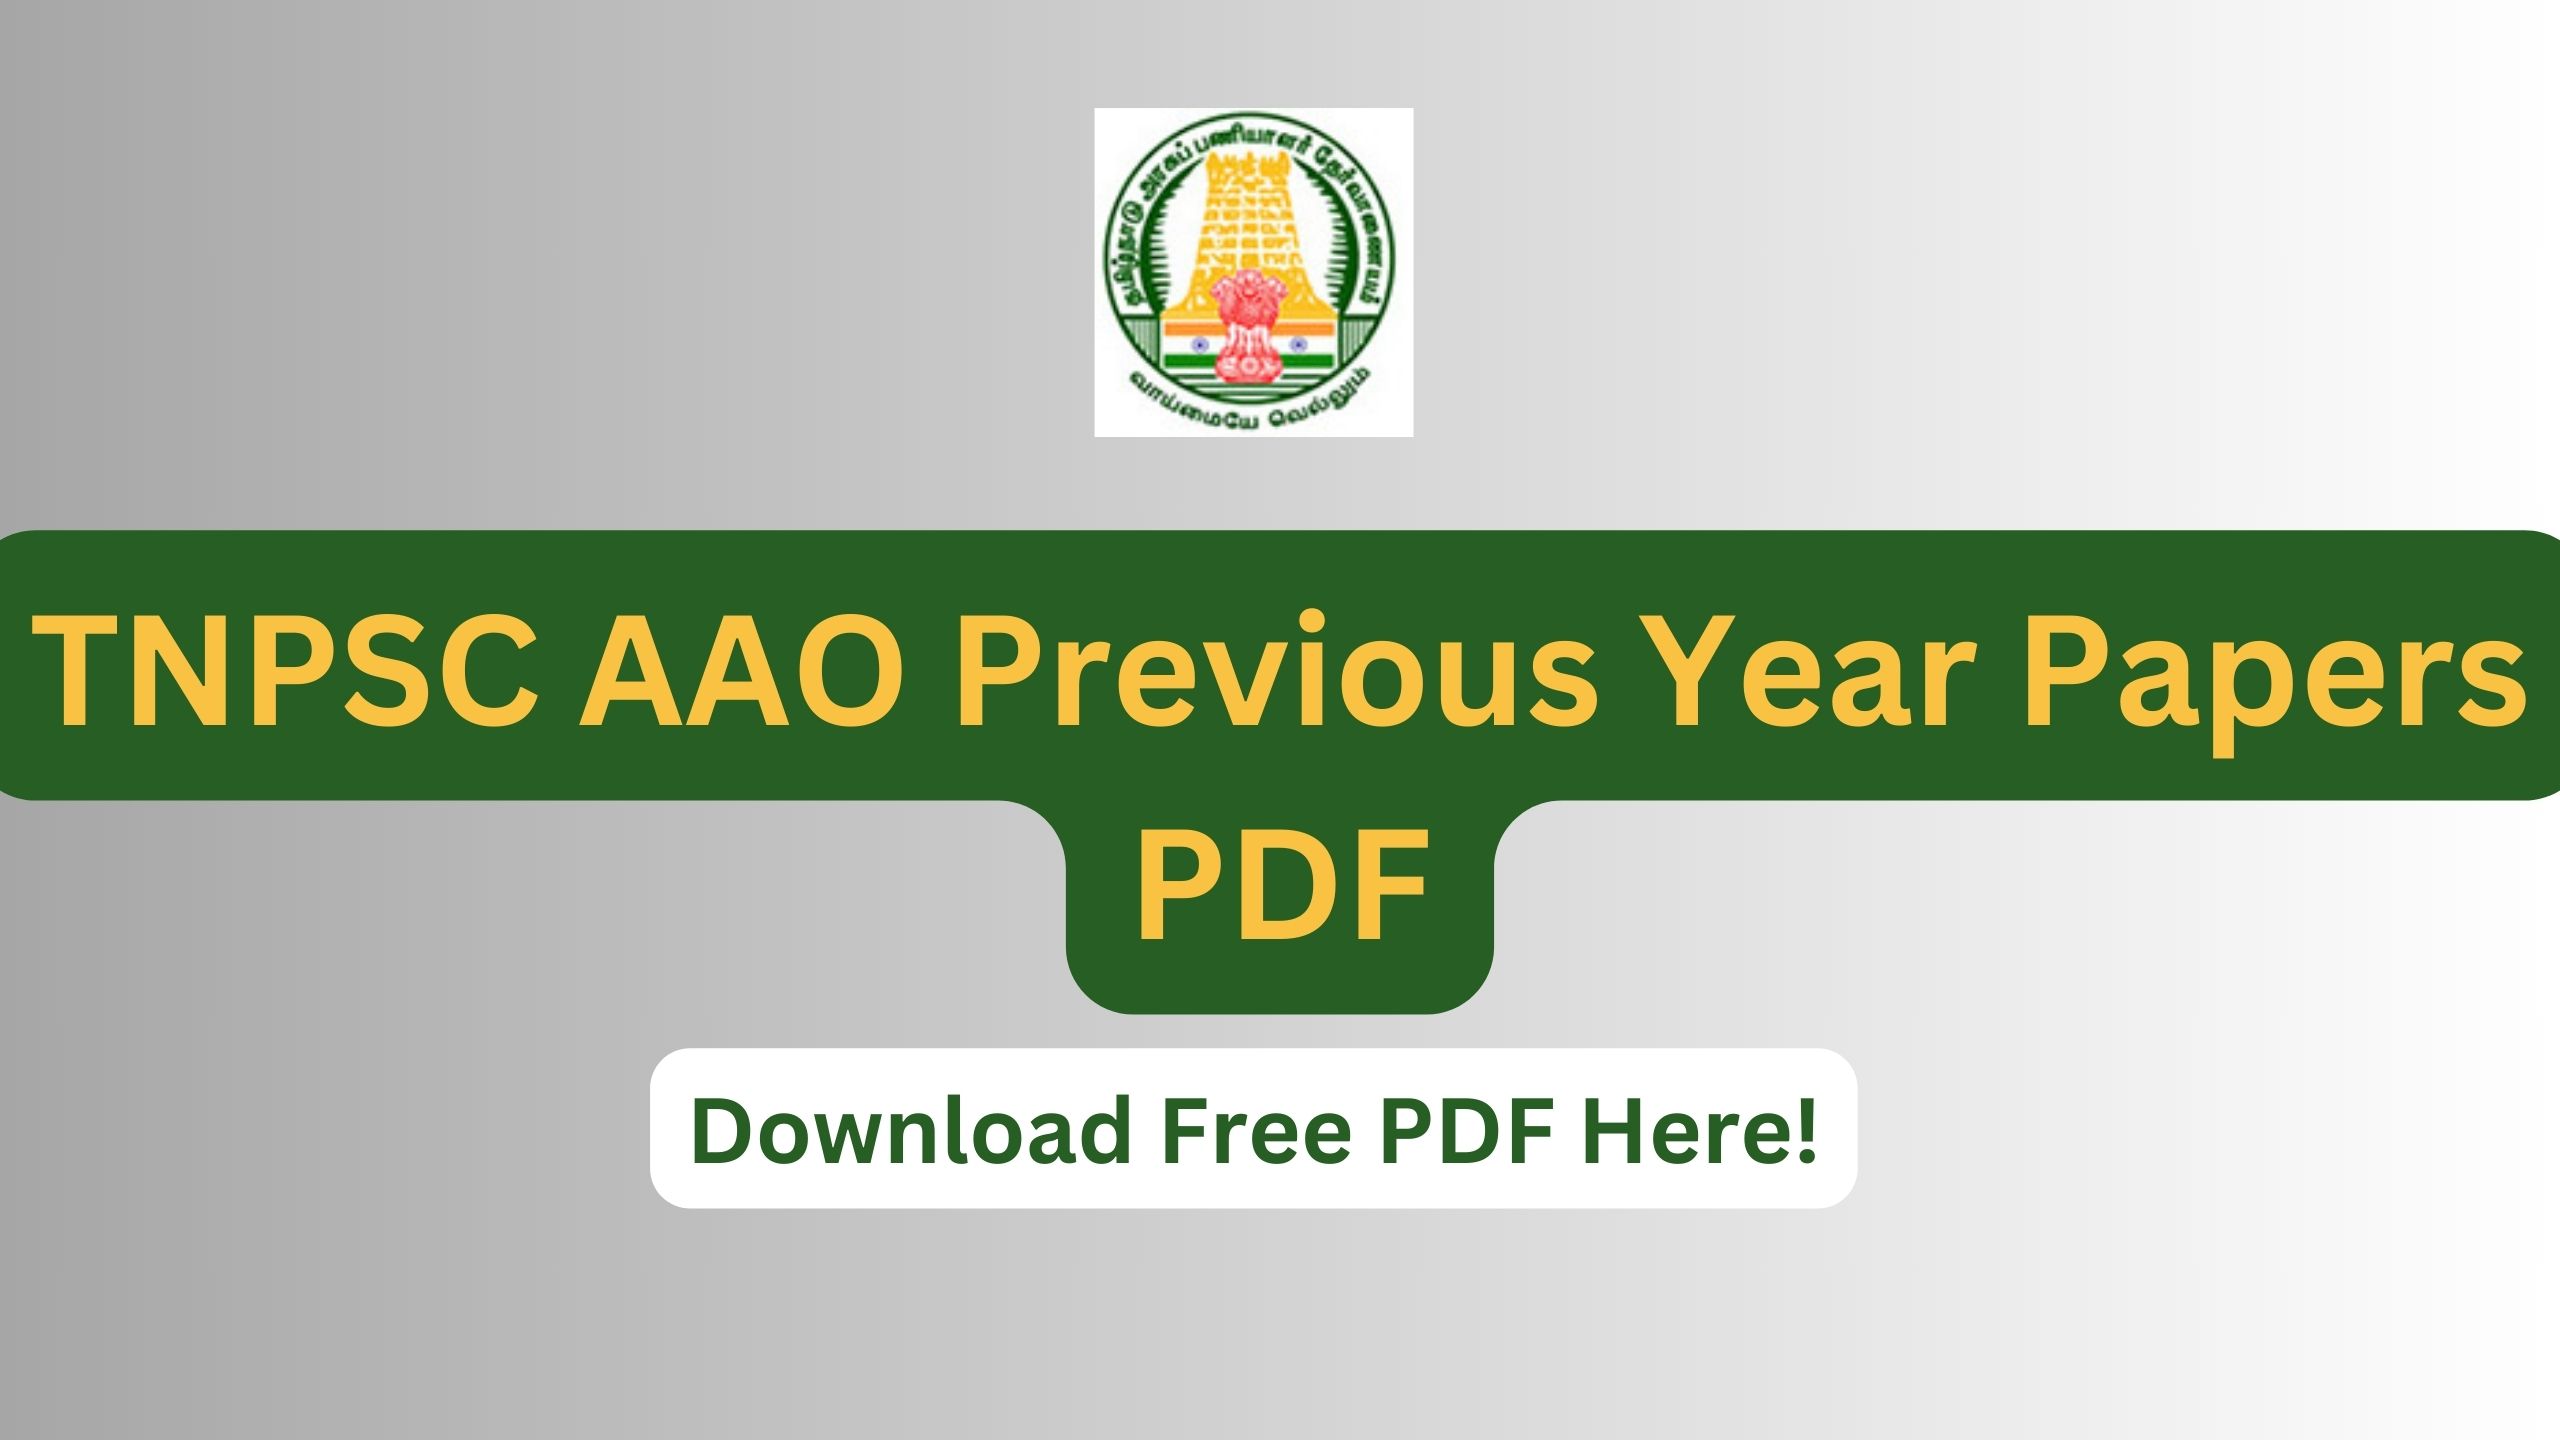 TNPSC AAO Previous Year Papers PDF